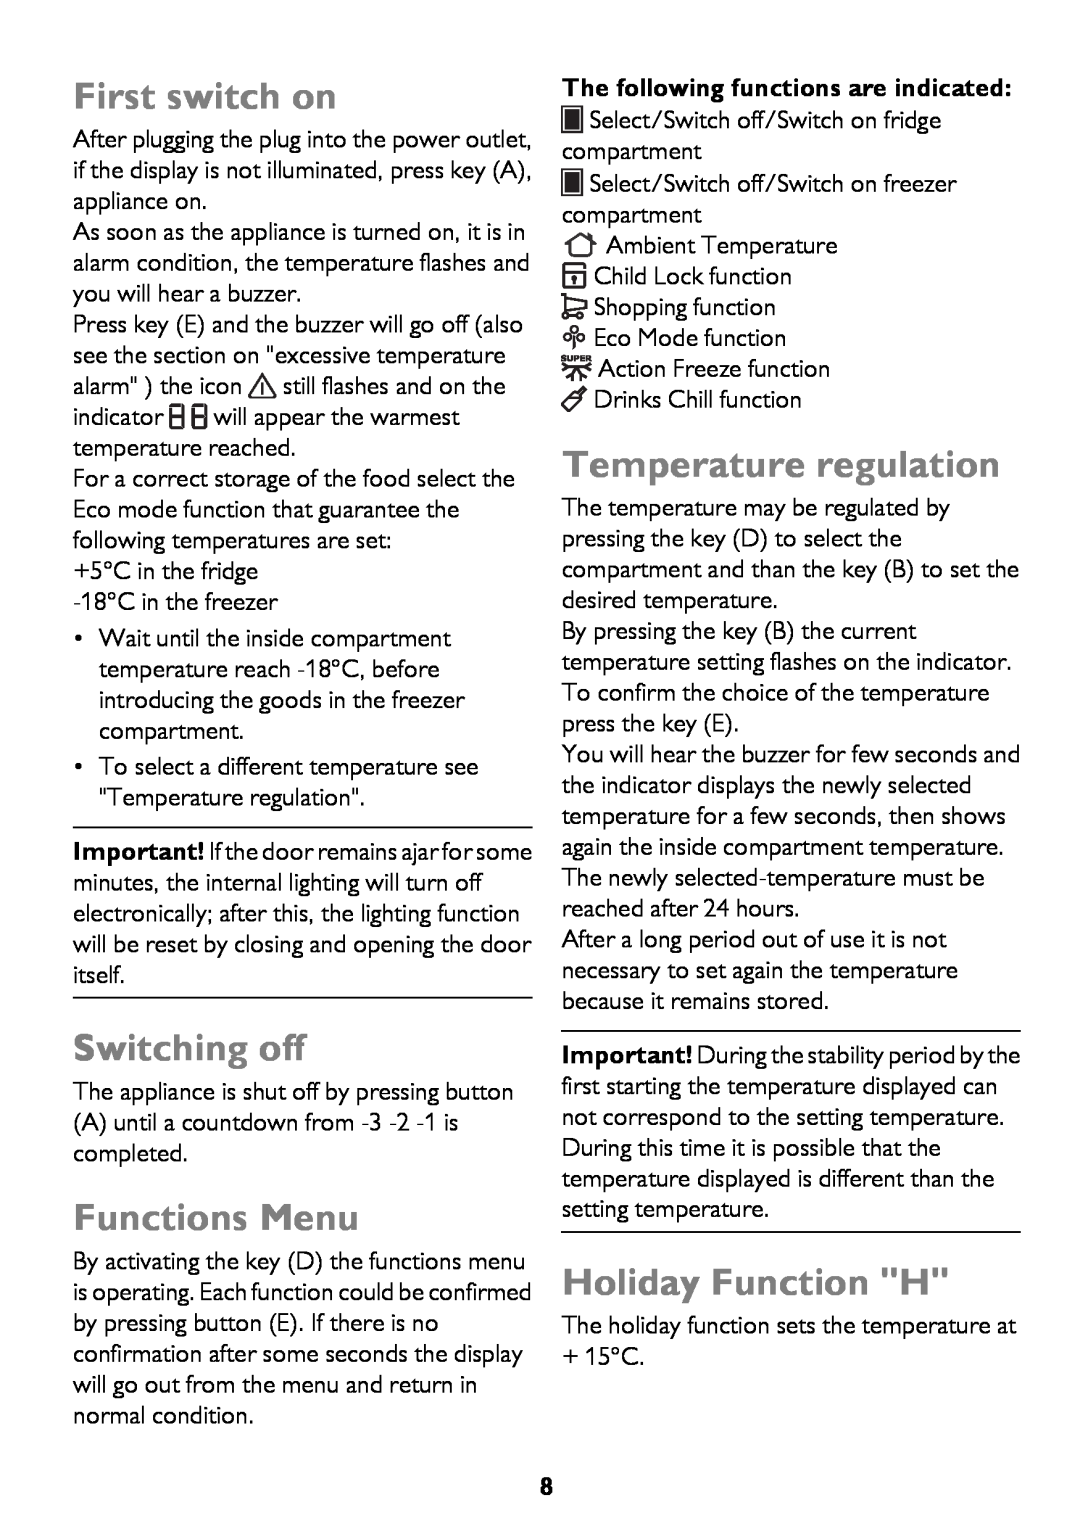 John Lewis JLSS2015, JLSS1814 First switch on, Switching off, Functions Menu, Temperature regulation, Holiday Function H 